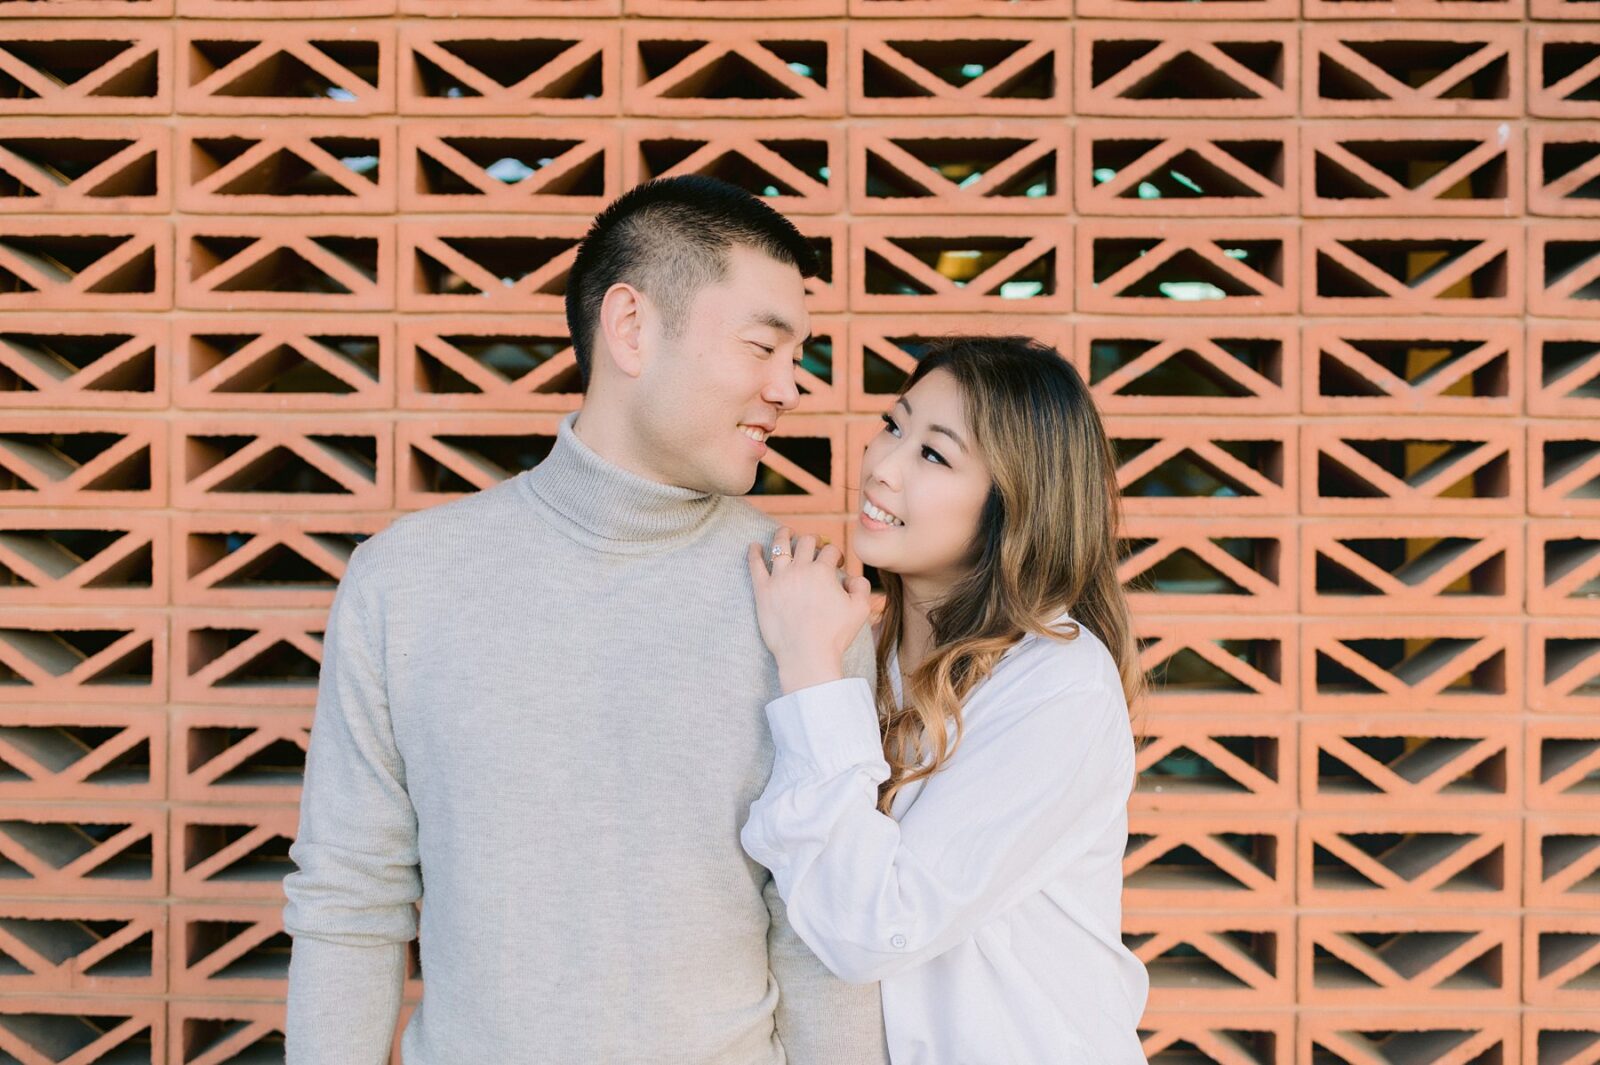 south congress hotel engagement photos, engagement session next to art deco brick wall, south austin engagement, neutral engagement session outfit, photos by Tara Lyons Photography, austin wedding photographer